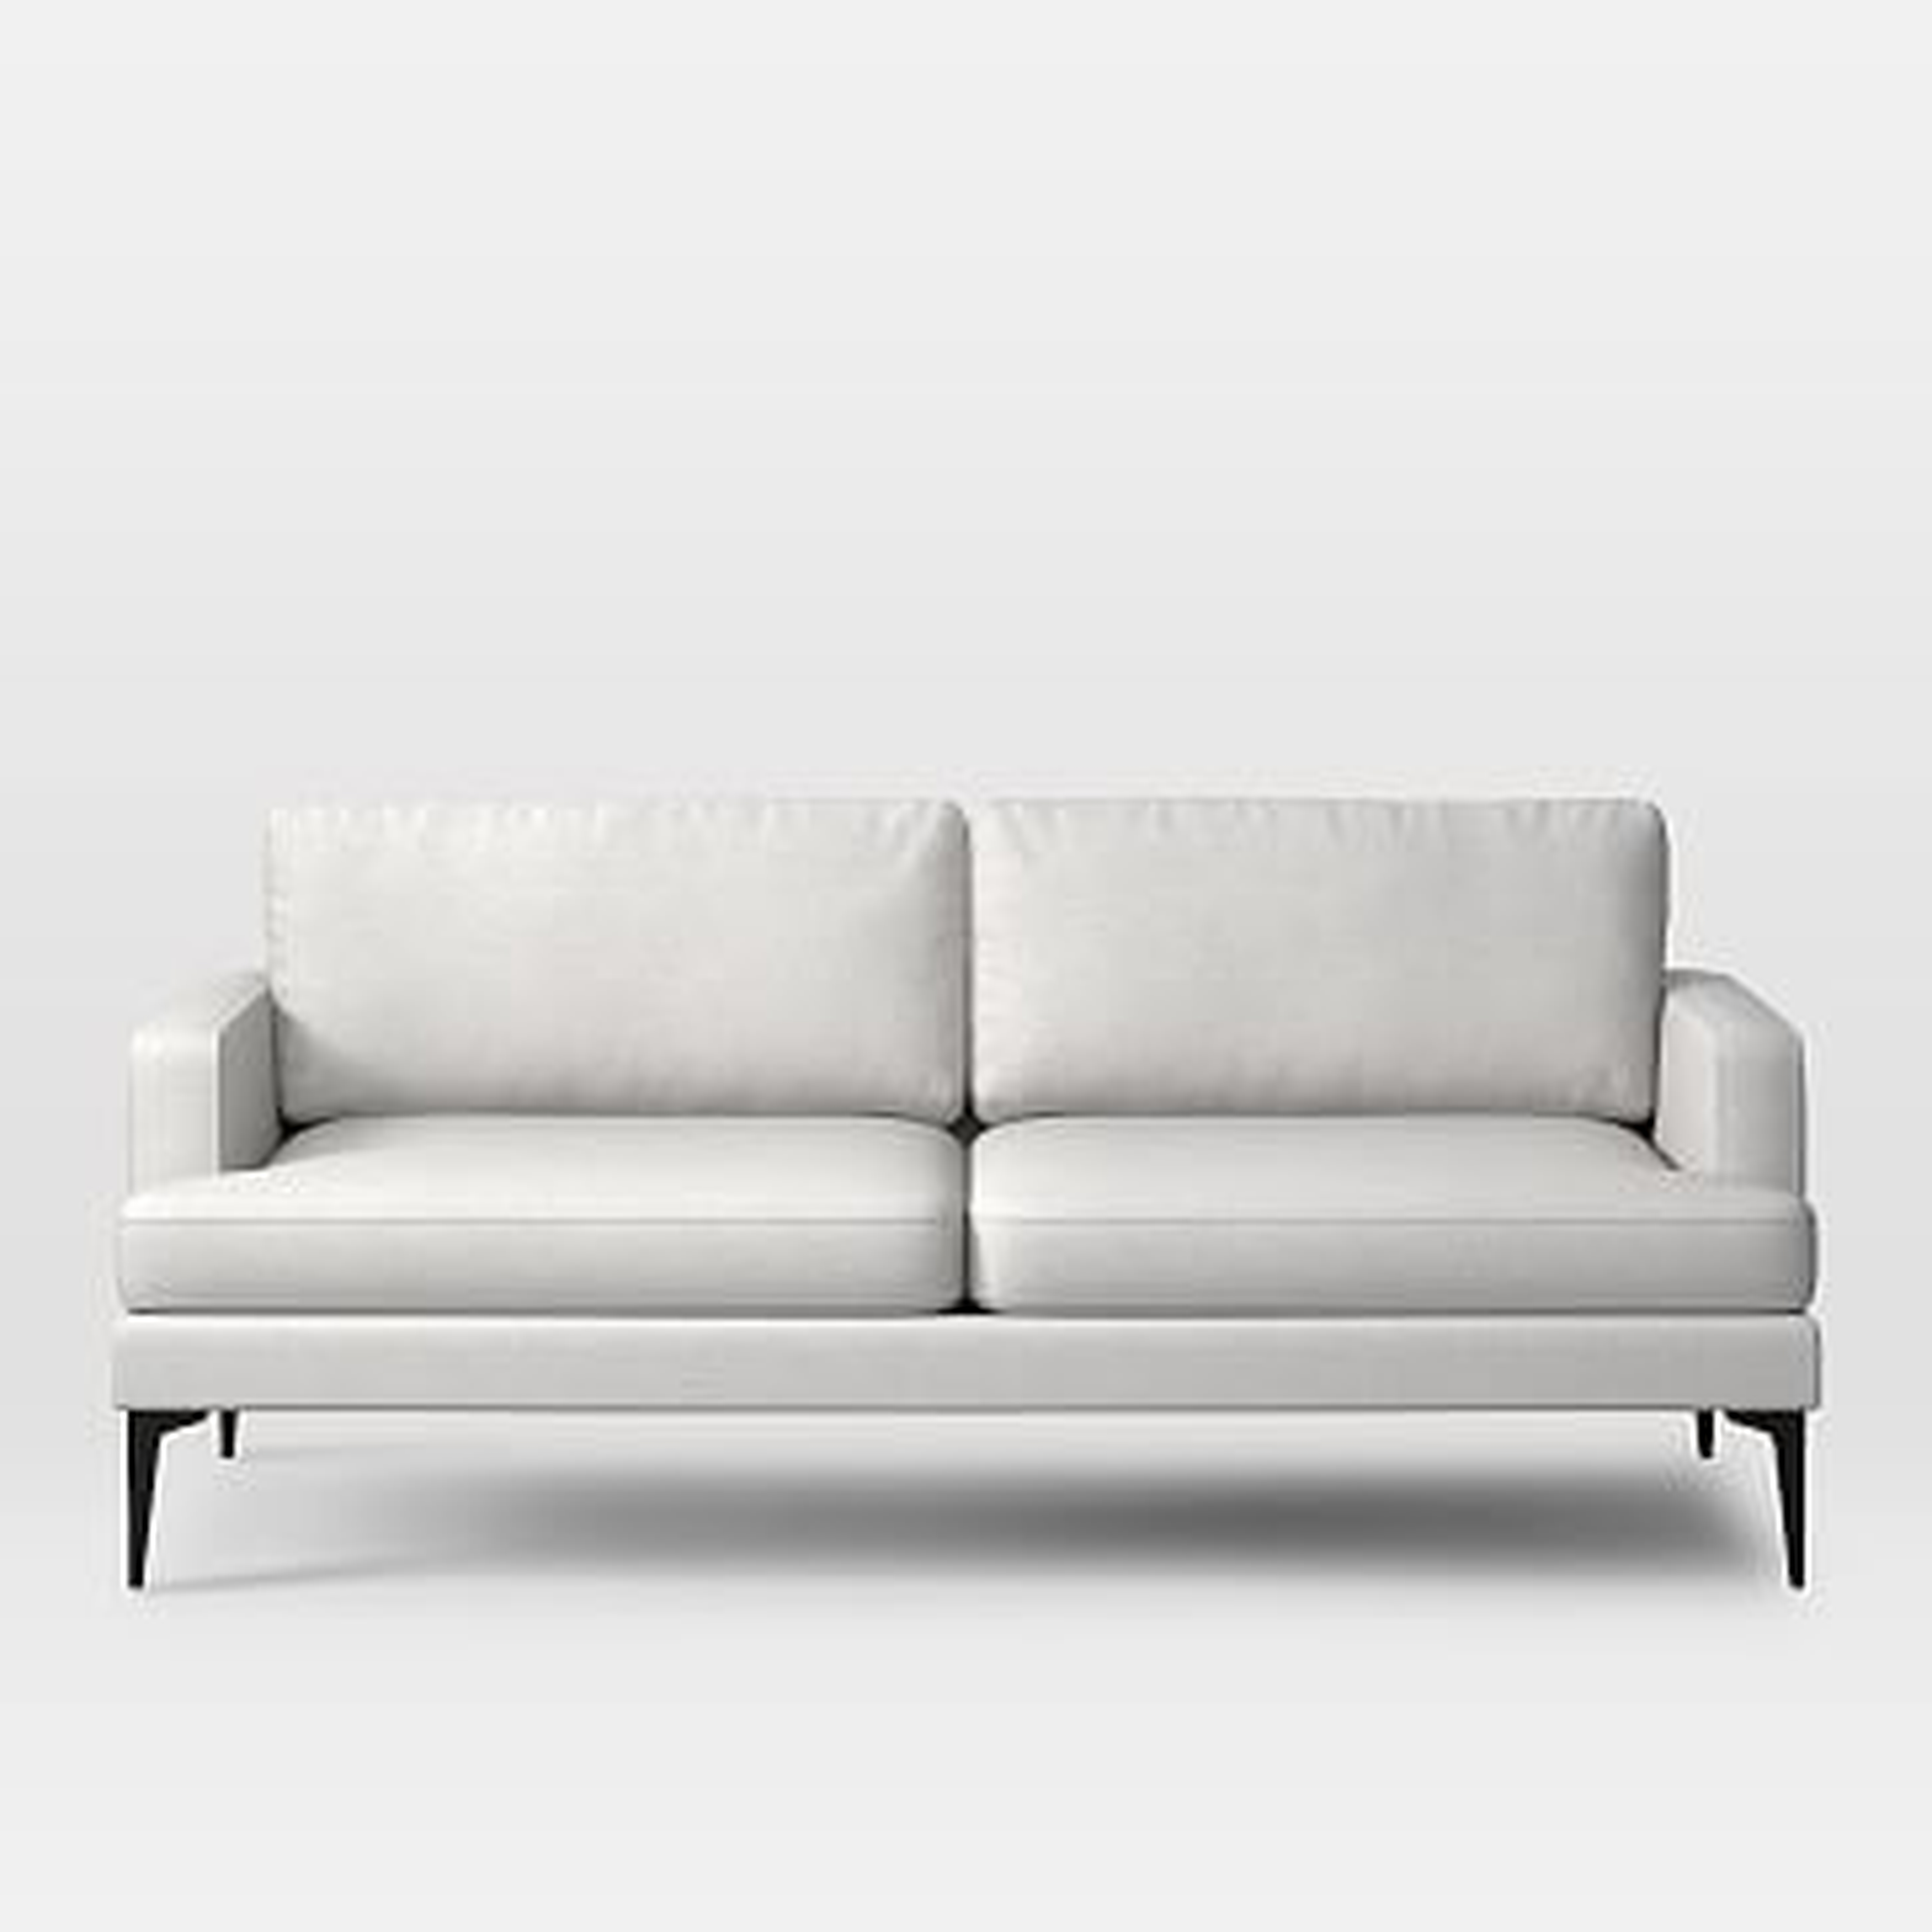 Andes 76.5"Sofa Eco Weave, Oyster, Dark Pewter - West Elm